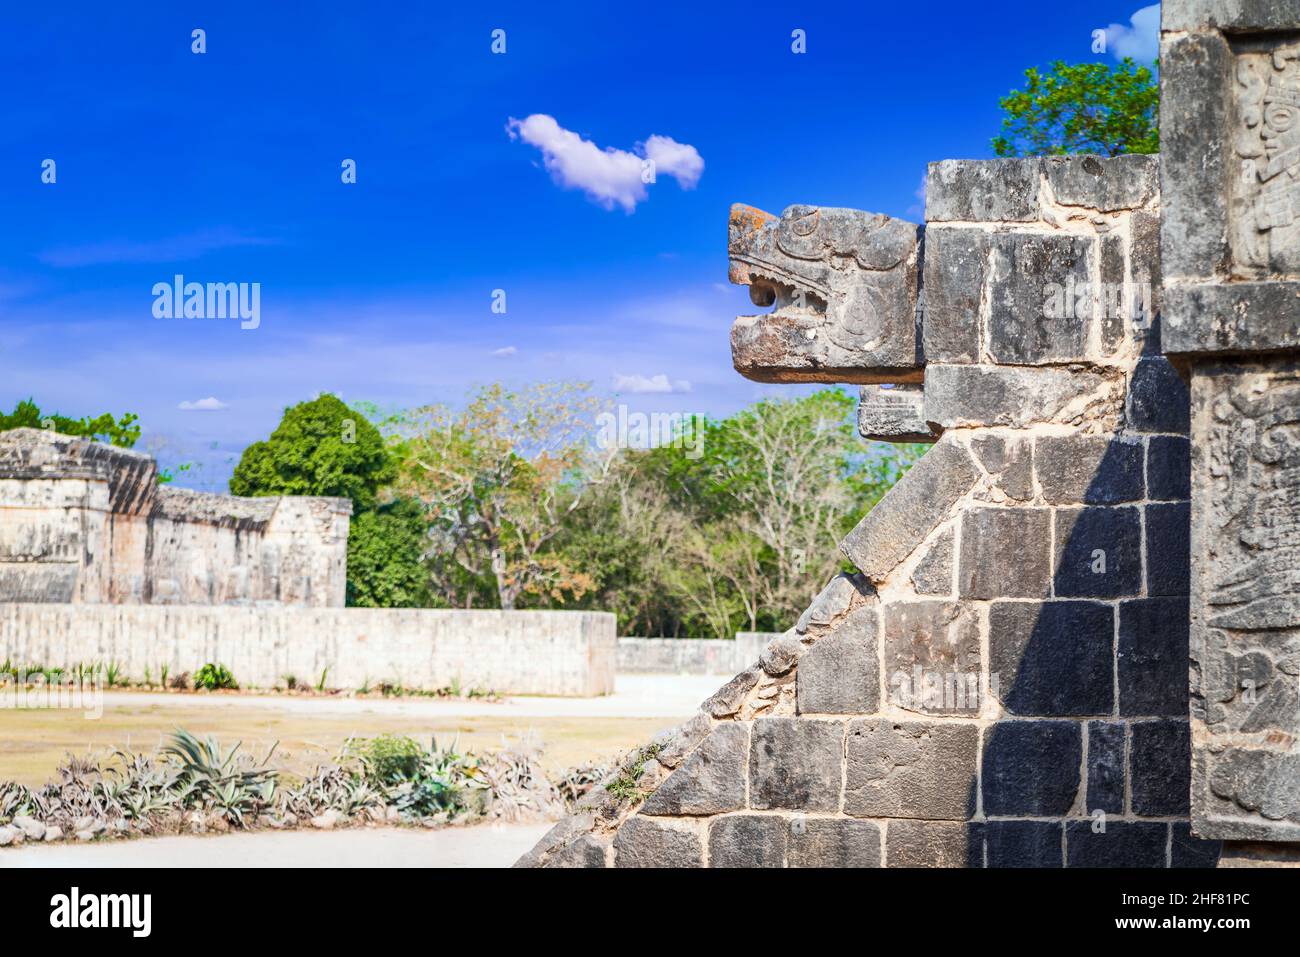 Chichen Itza, Mexico. Platform of the Eagles and Jaguars in the Mayan city of Chichen Itza, Yucatan Peninsula in Mexic. Stock Photo